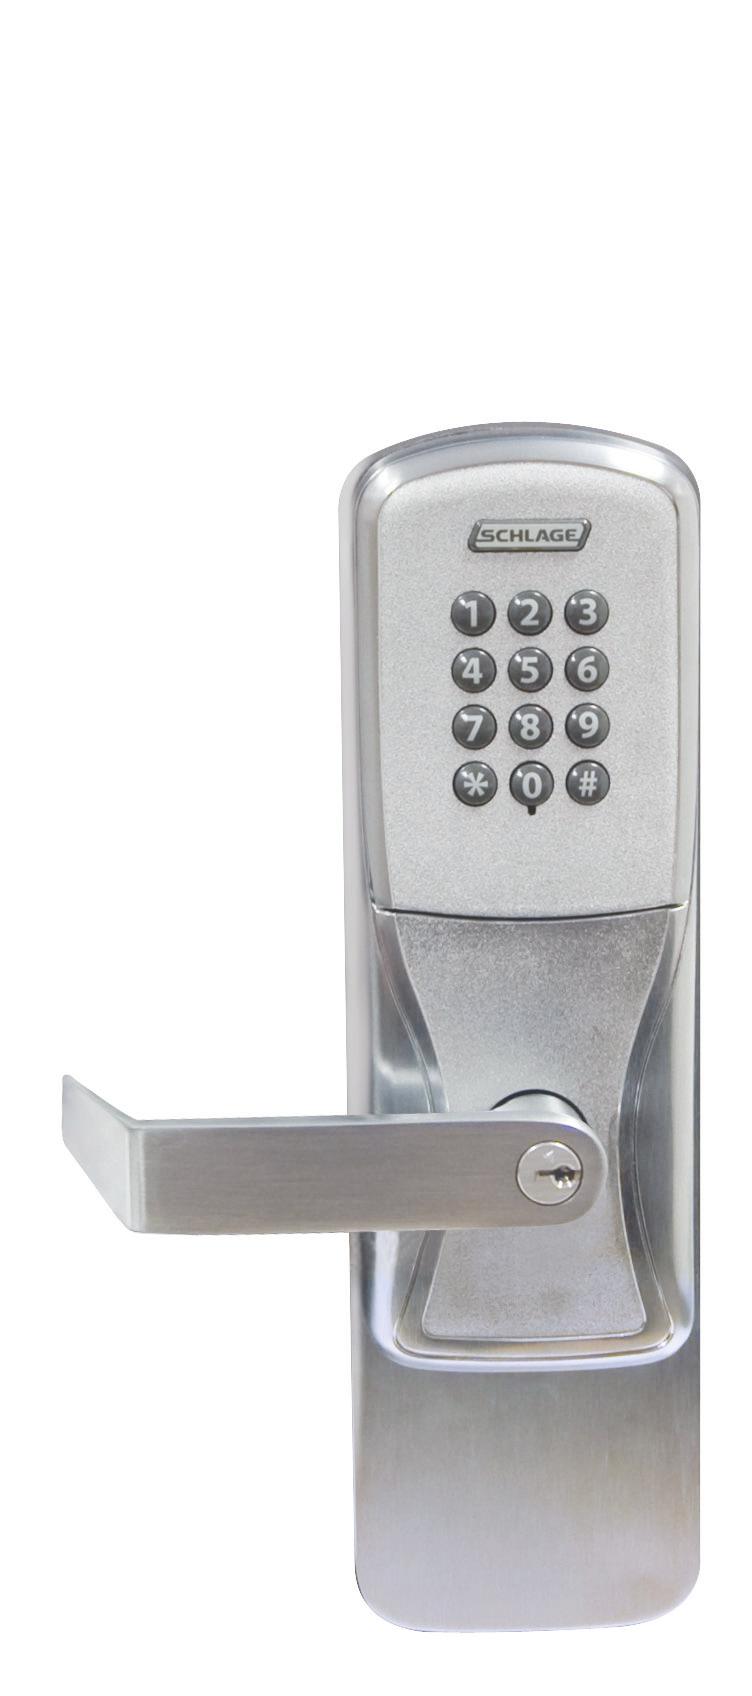 most Standard, FSIC or SFIC keyways from major brands of master key systems including Schlage, Sargent, Corbin, Medeco and Yale Von Duprin 22/22F